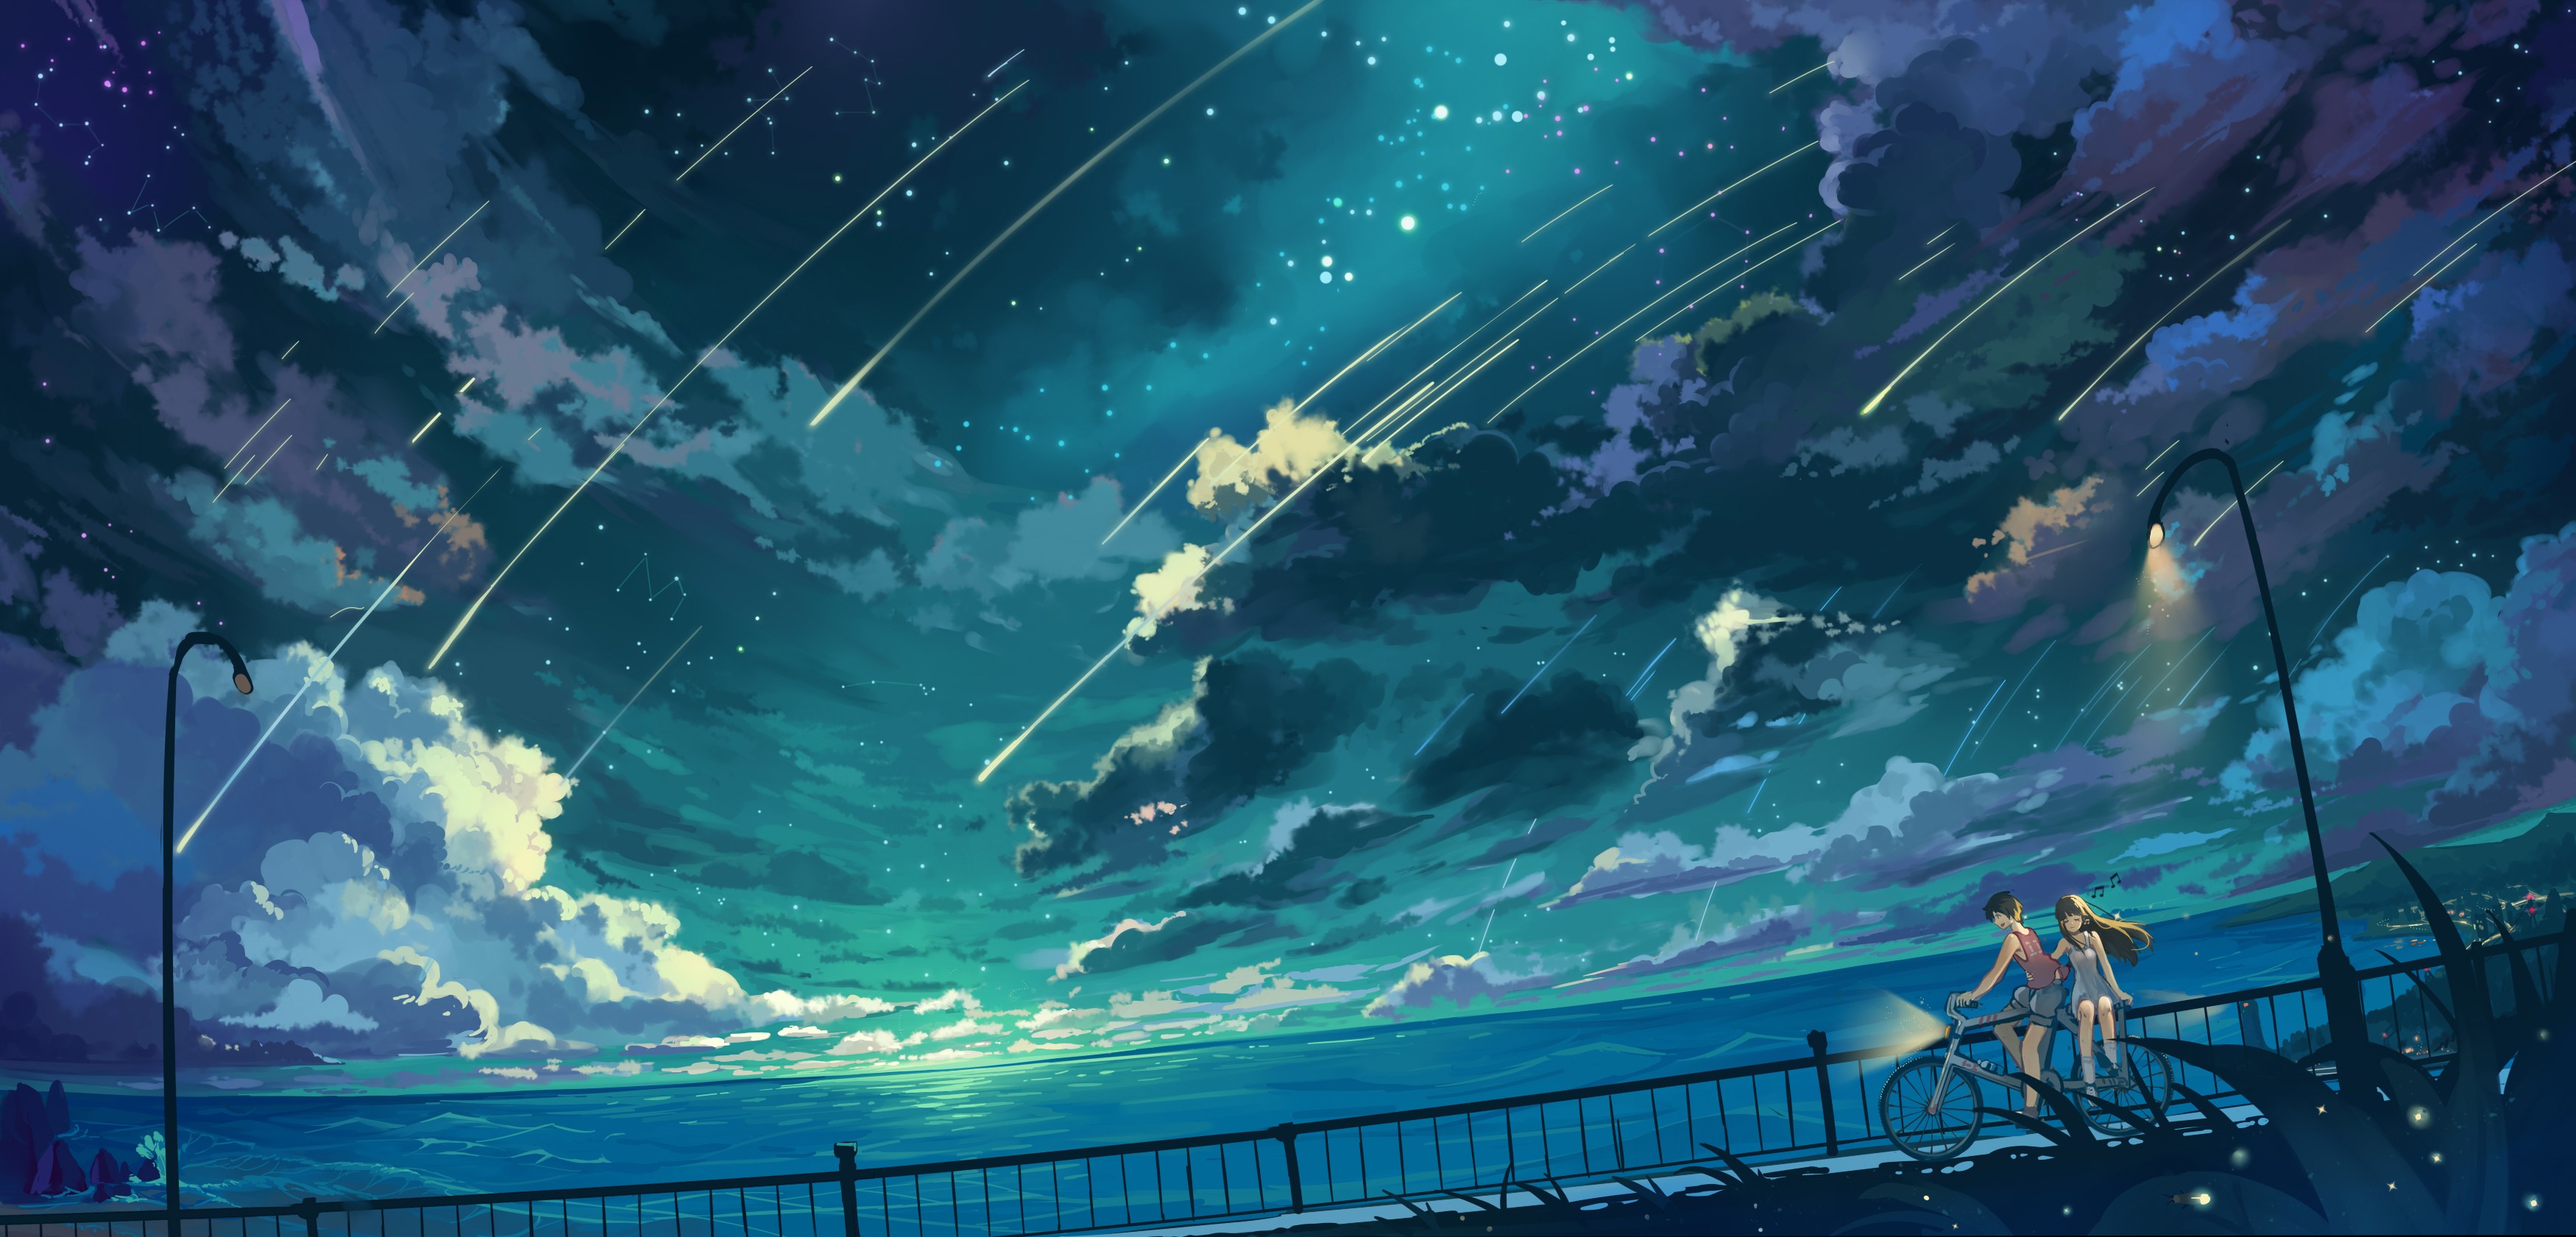 Night Sky Anime Wallpaper Stock Photo, Picture and Royalty Free Image.  Image 206808597.